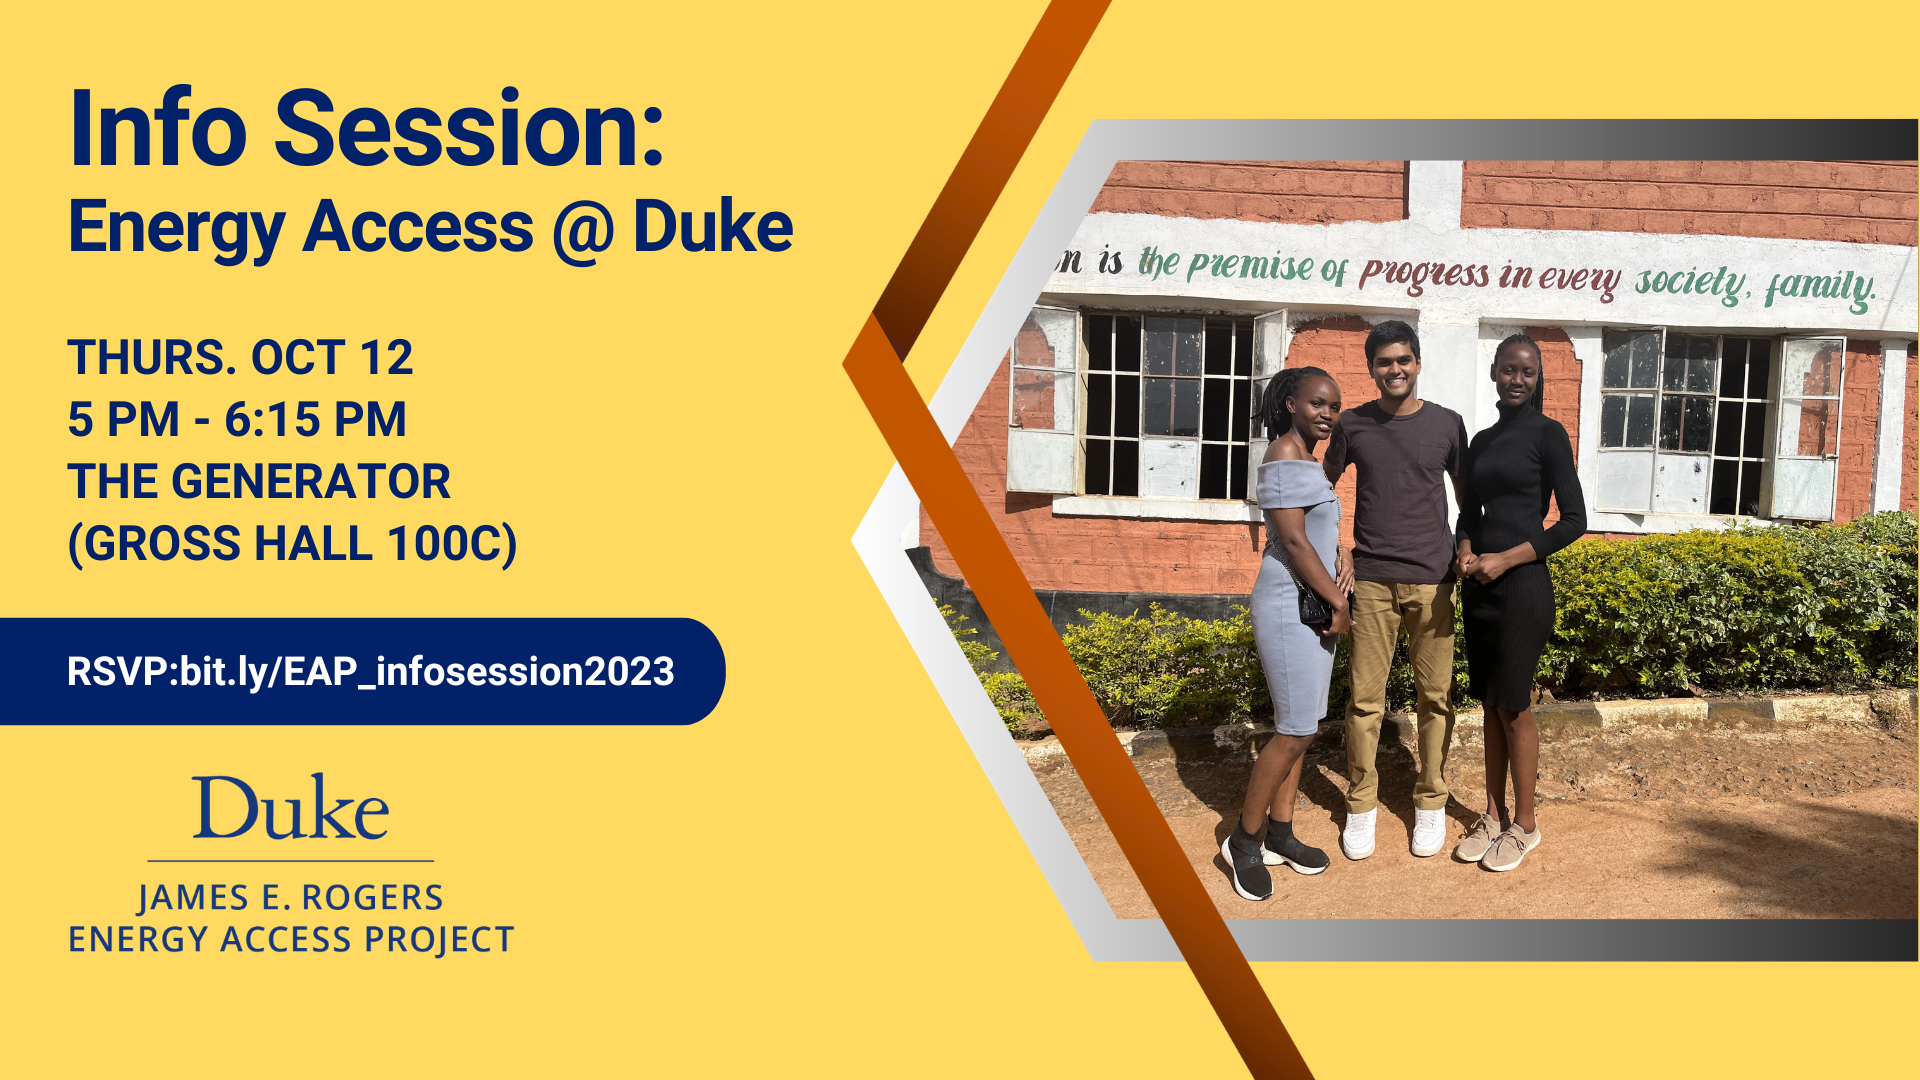 Info Session: Energy Access at Duke; Thur. Oct 12, 5-6:15 PM, the Generator (Gross Hall 100C); Energy access project logo; photo of Duke student with two Kenyan colleagues during 2022 internship; background text "education is the premise of progress in every society, family."